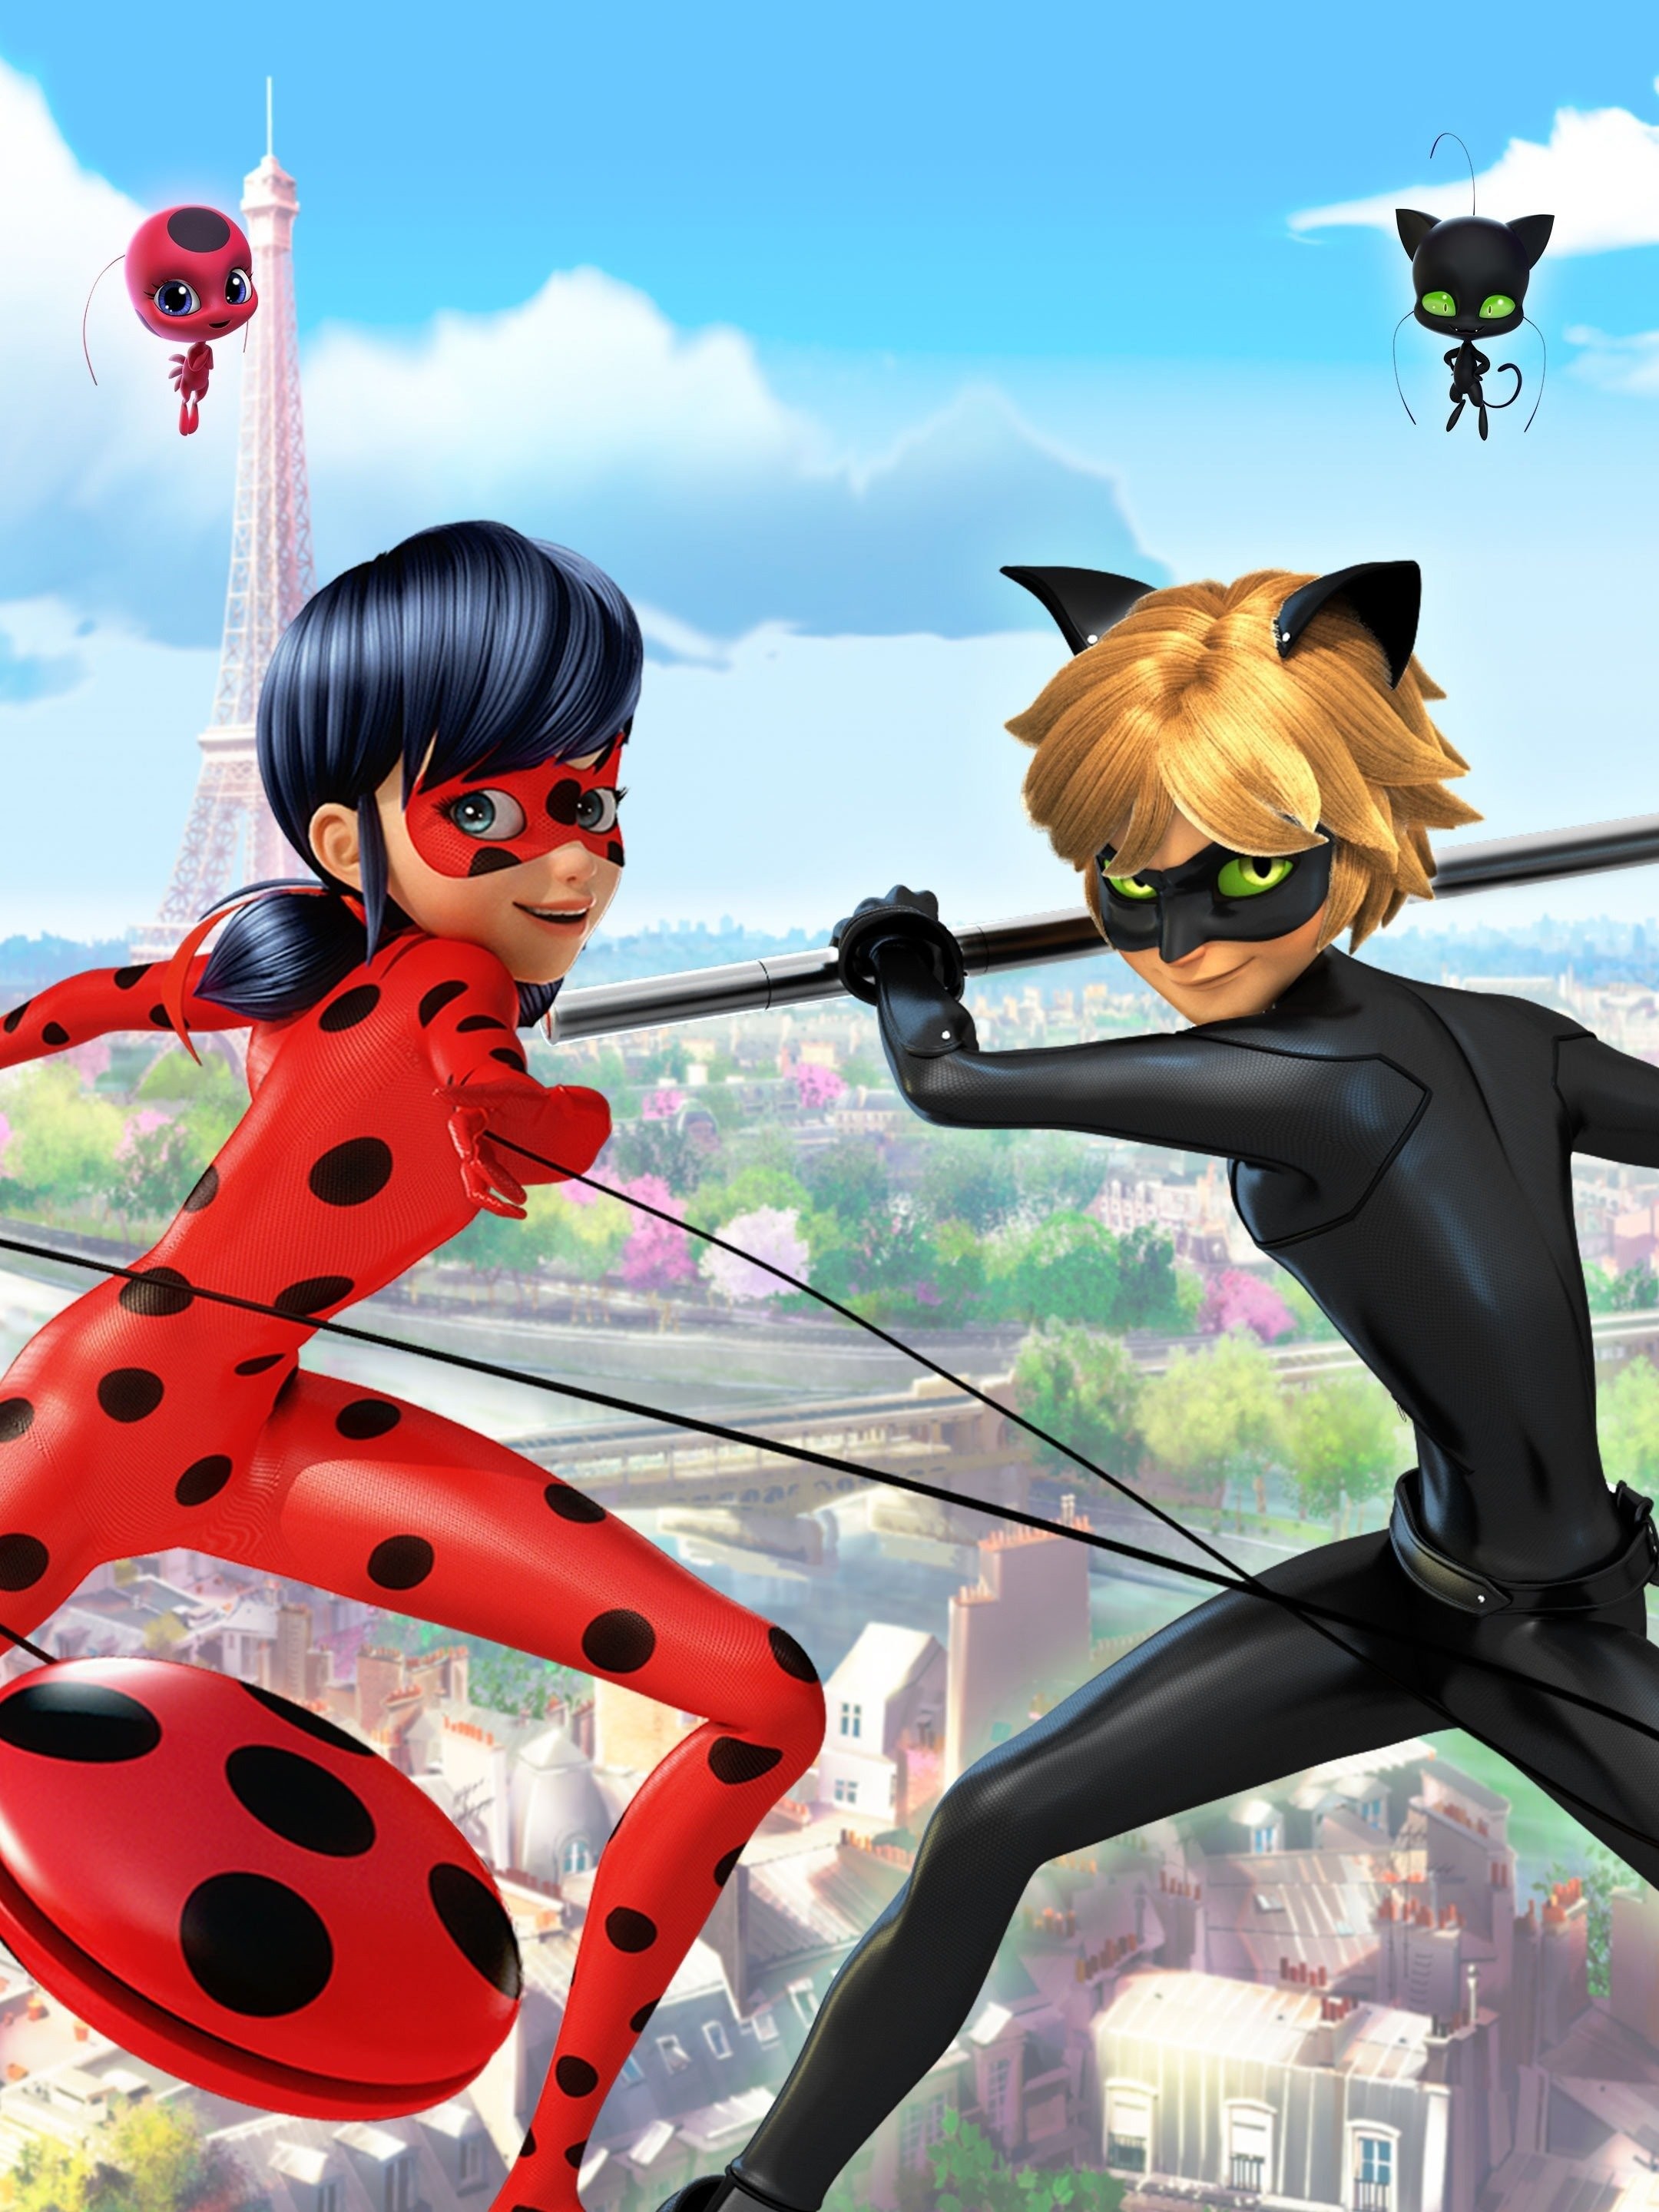 bowen lim recommends Show Me A Picture Of Ladybug From Miraculous